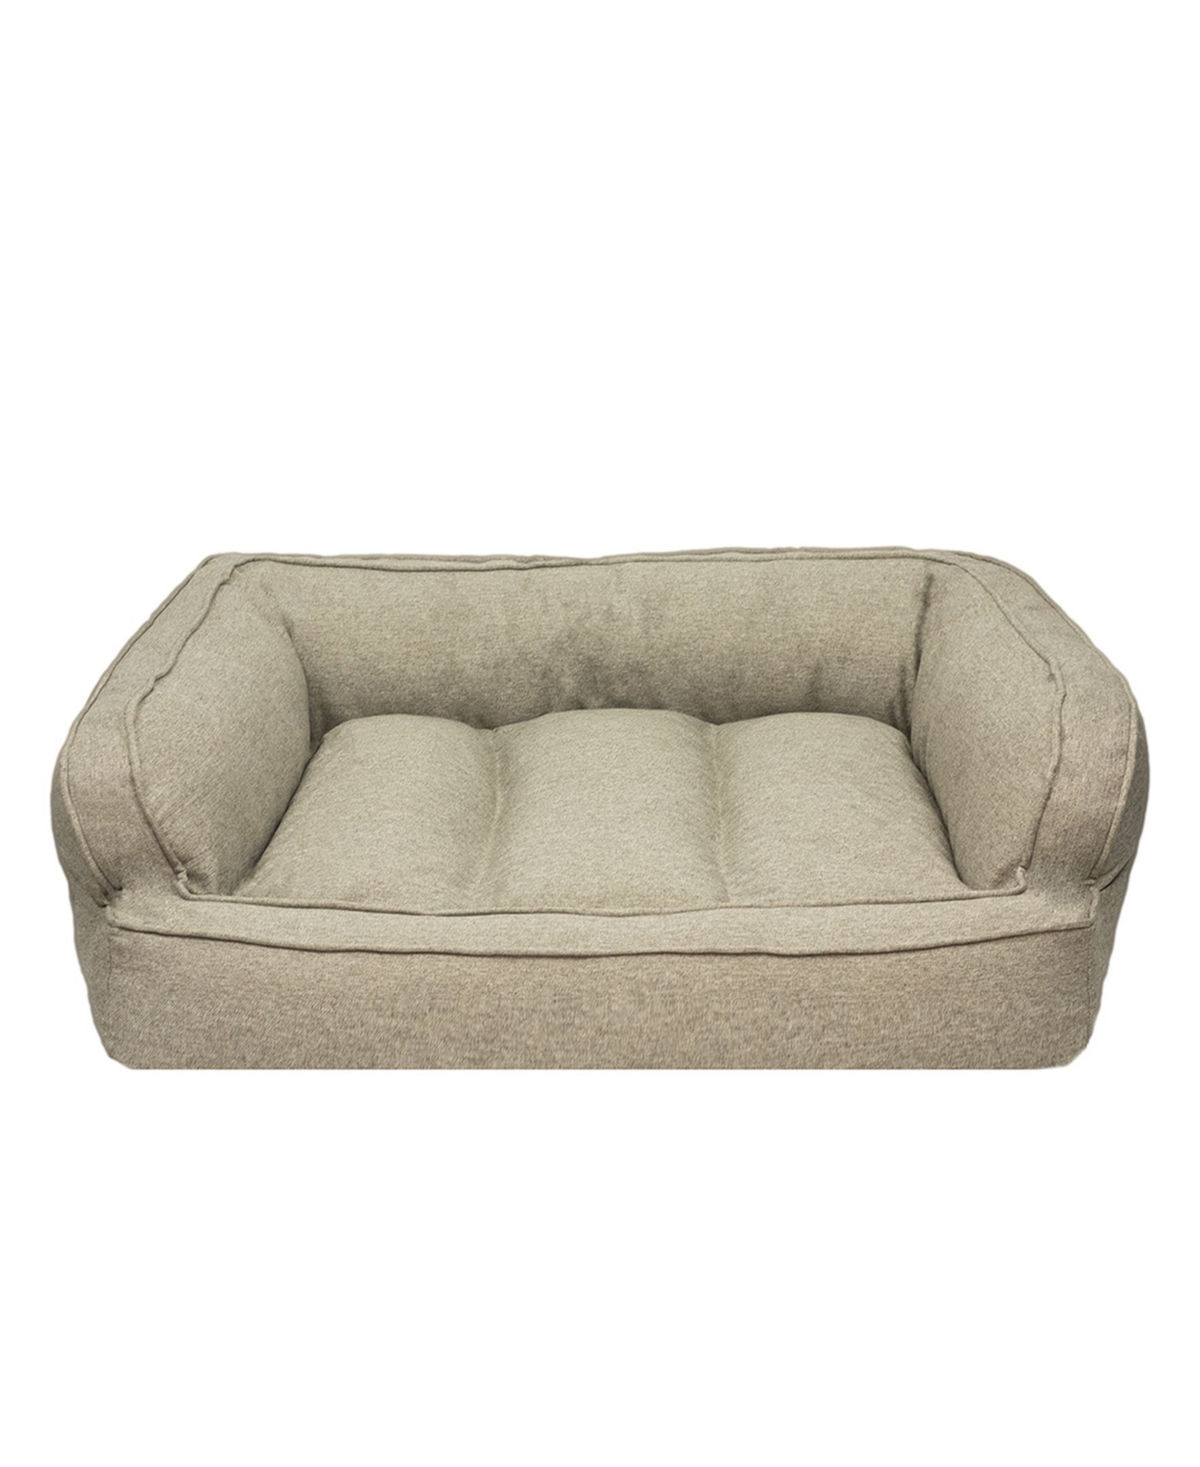 Arlee Memory Foam Sofa and Couch Style Pet Bed, Small - Drizzle Light Gray